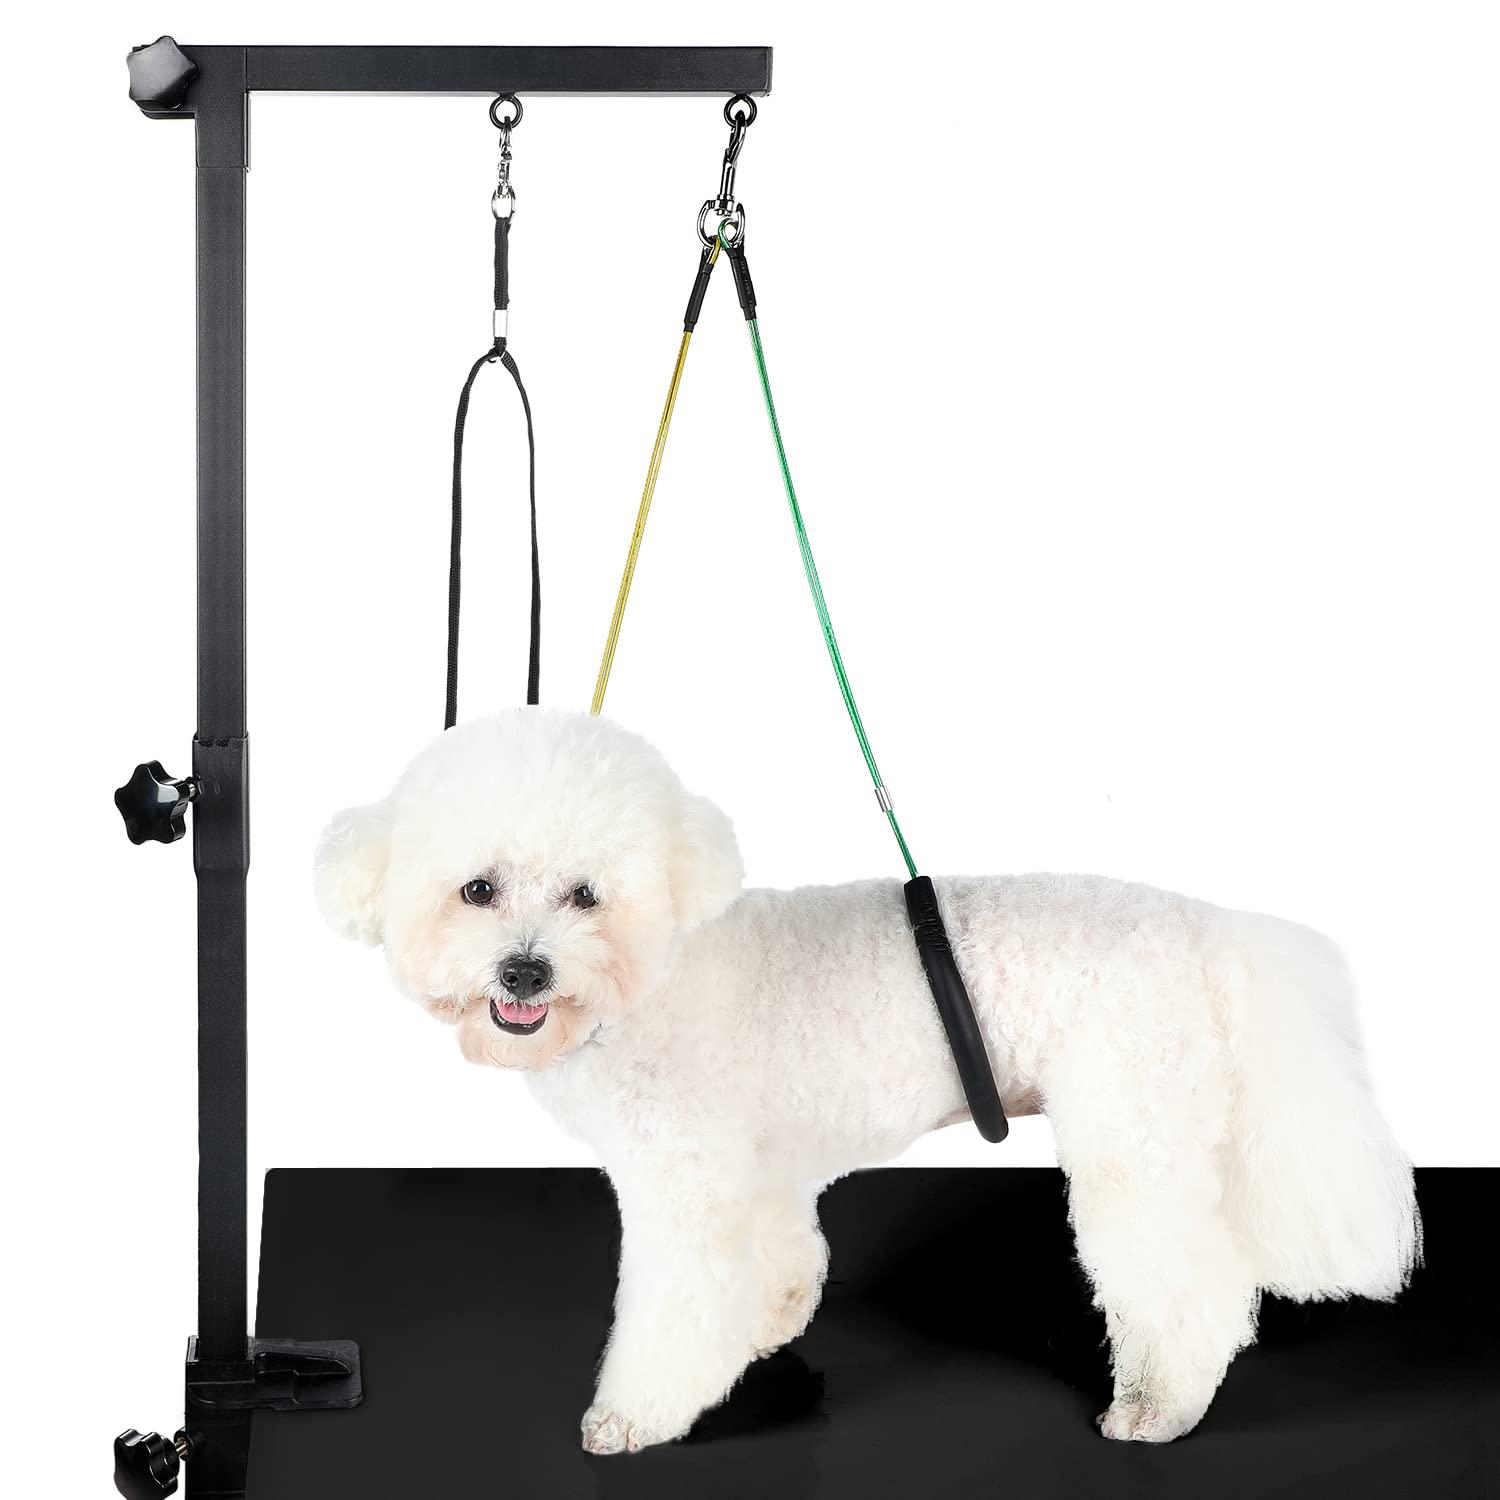 Dog-Grooming-Arm, 35 Adjustable Pet Grooming Table Arm with Clamp, Dog Stand for Small Medium Dogs at Home,